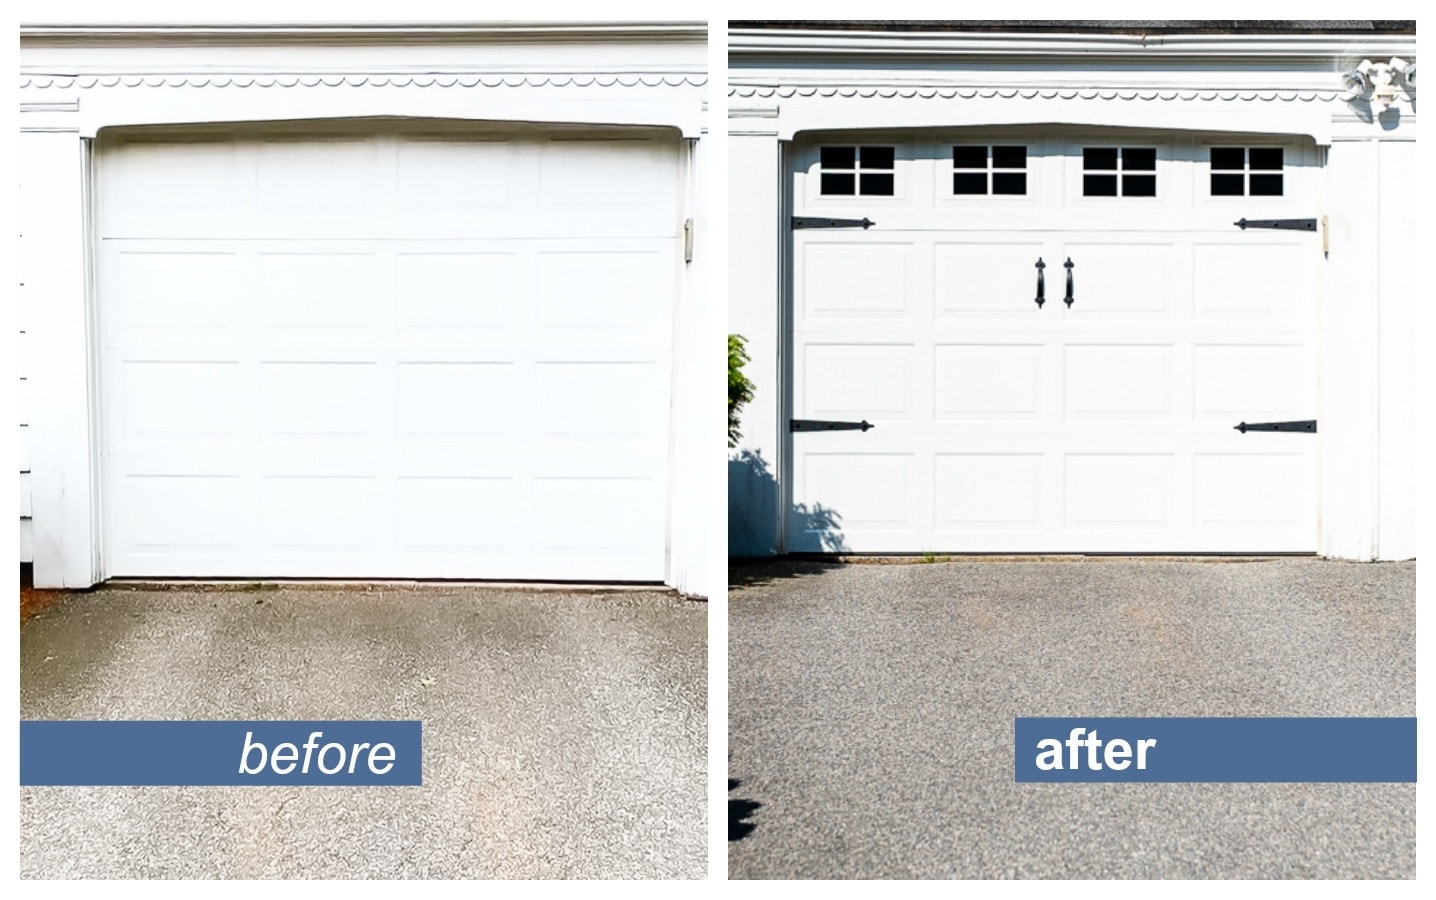 Garage door before (plain) and after (with decorative decals)